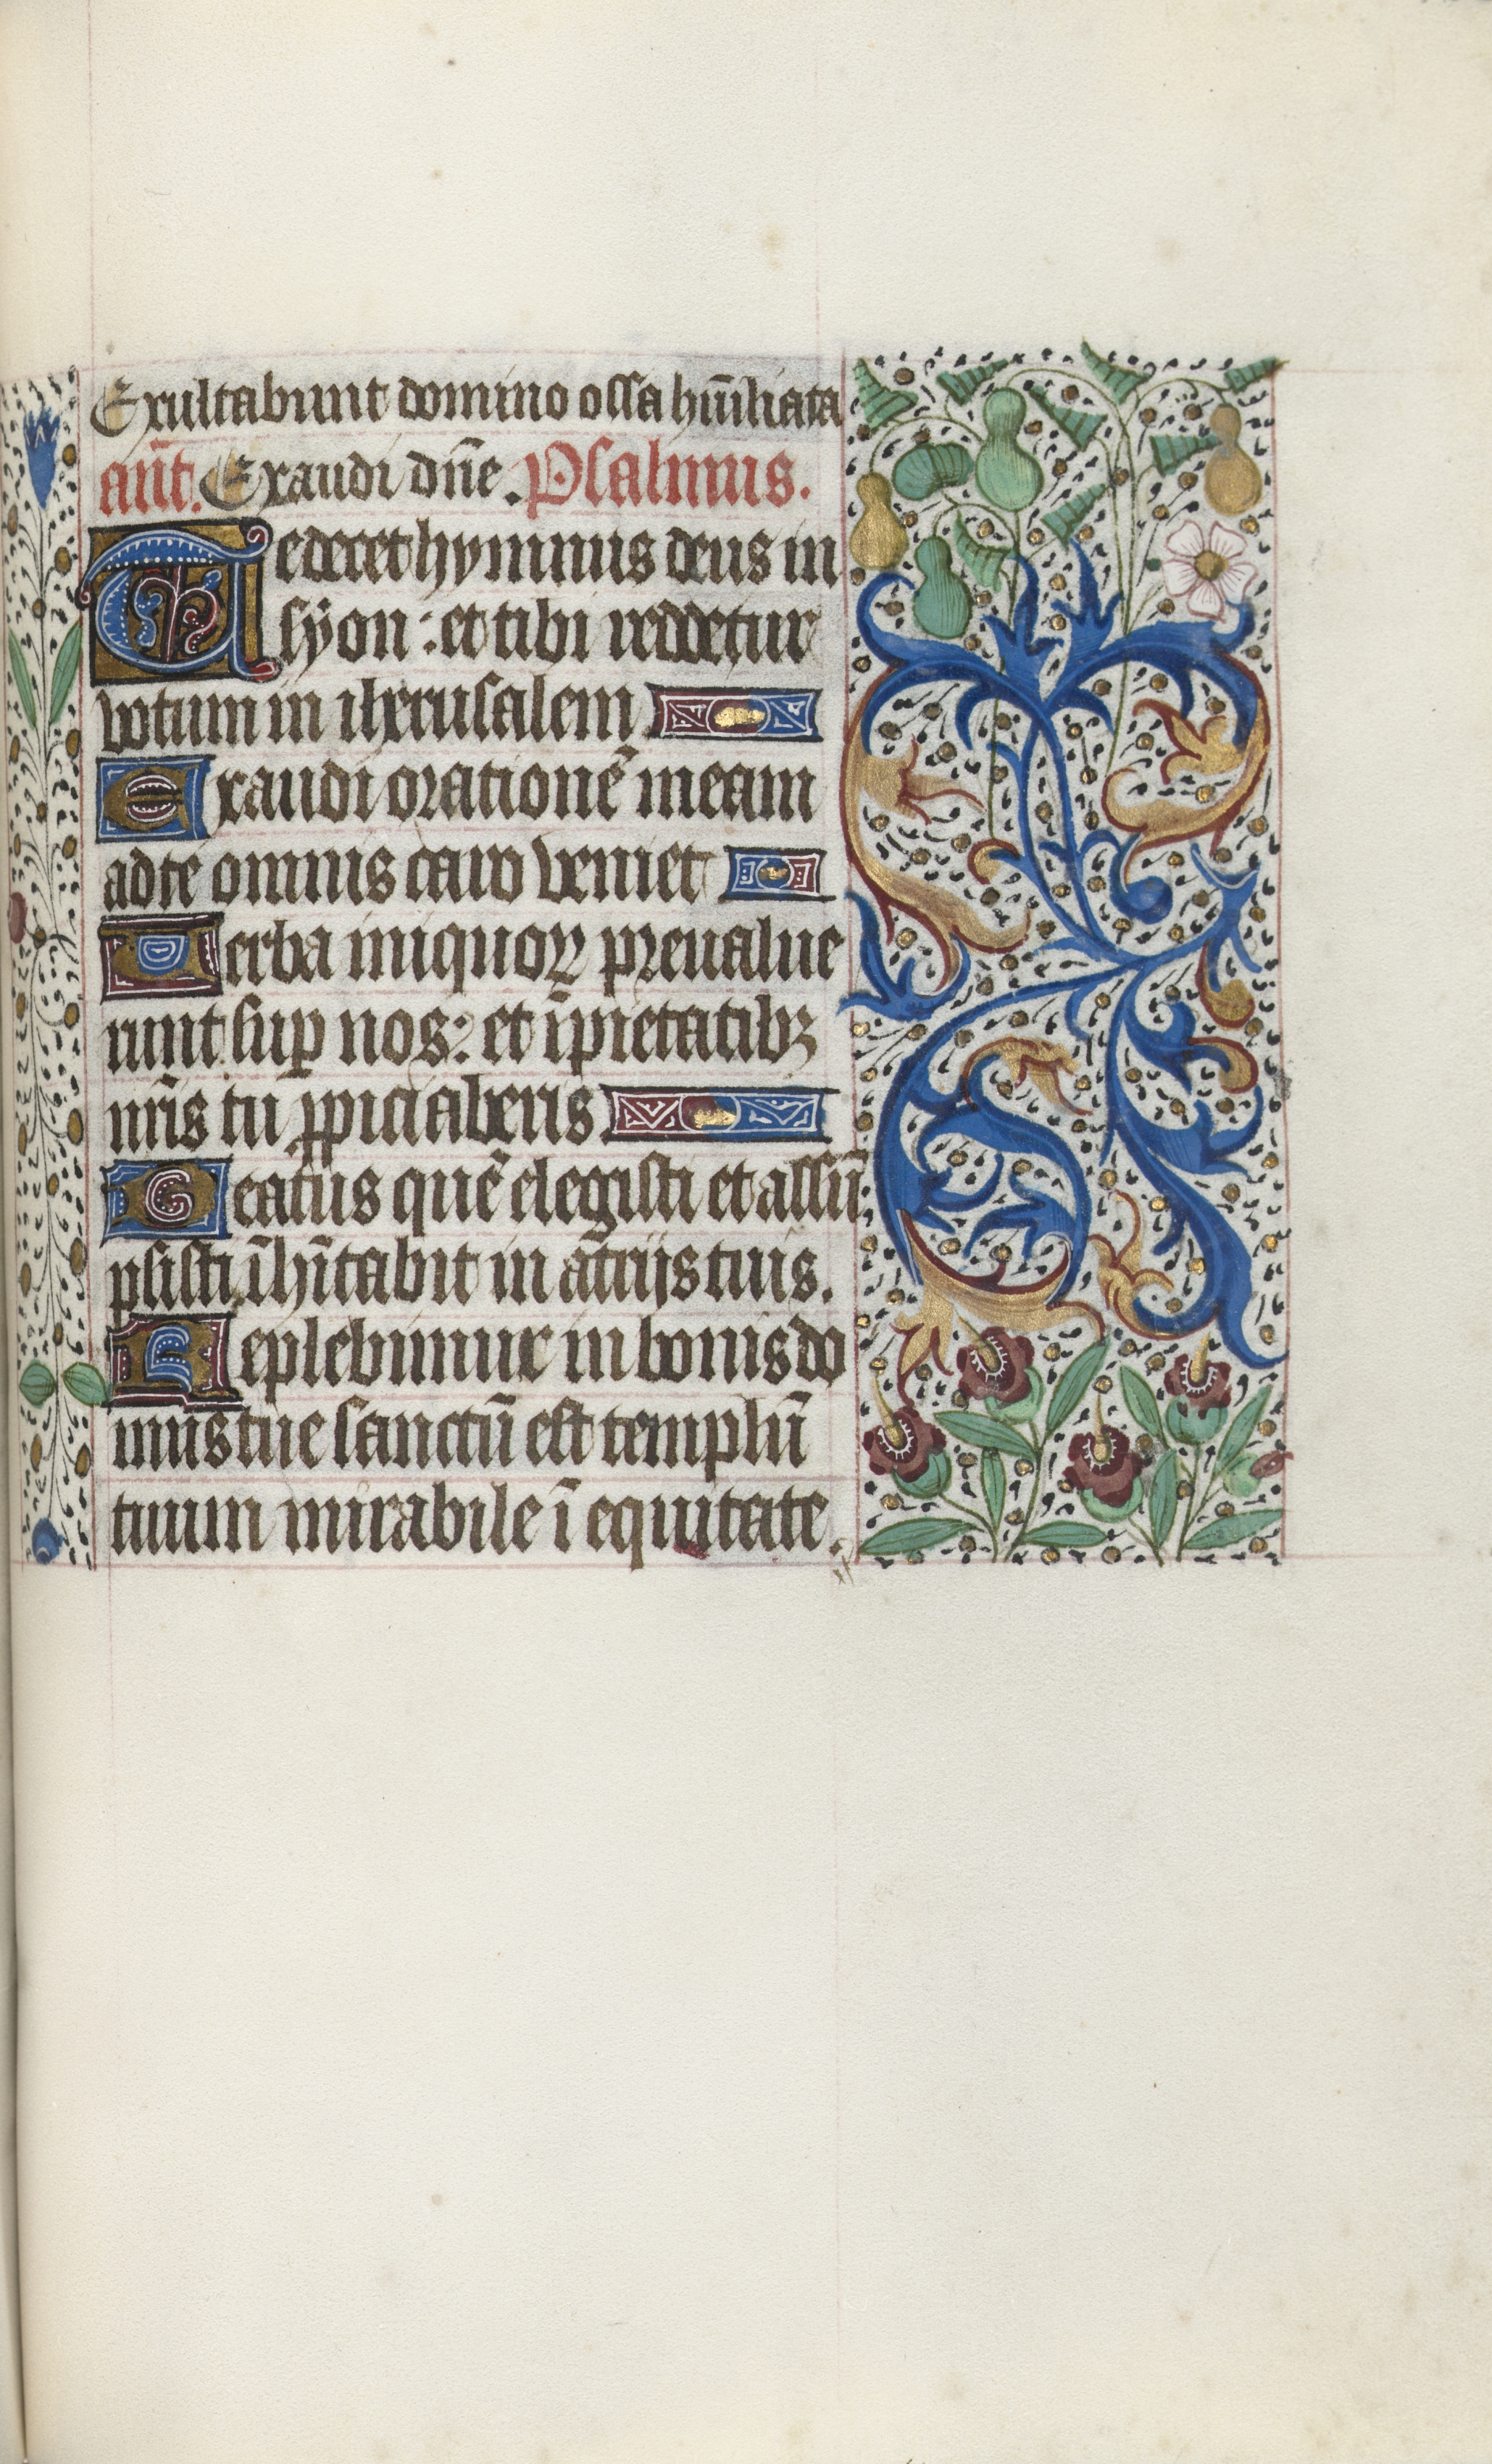 Book of Hours (Use of Rouen): fol. 136r